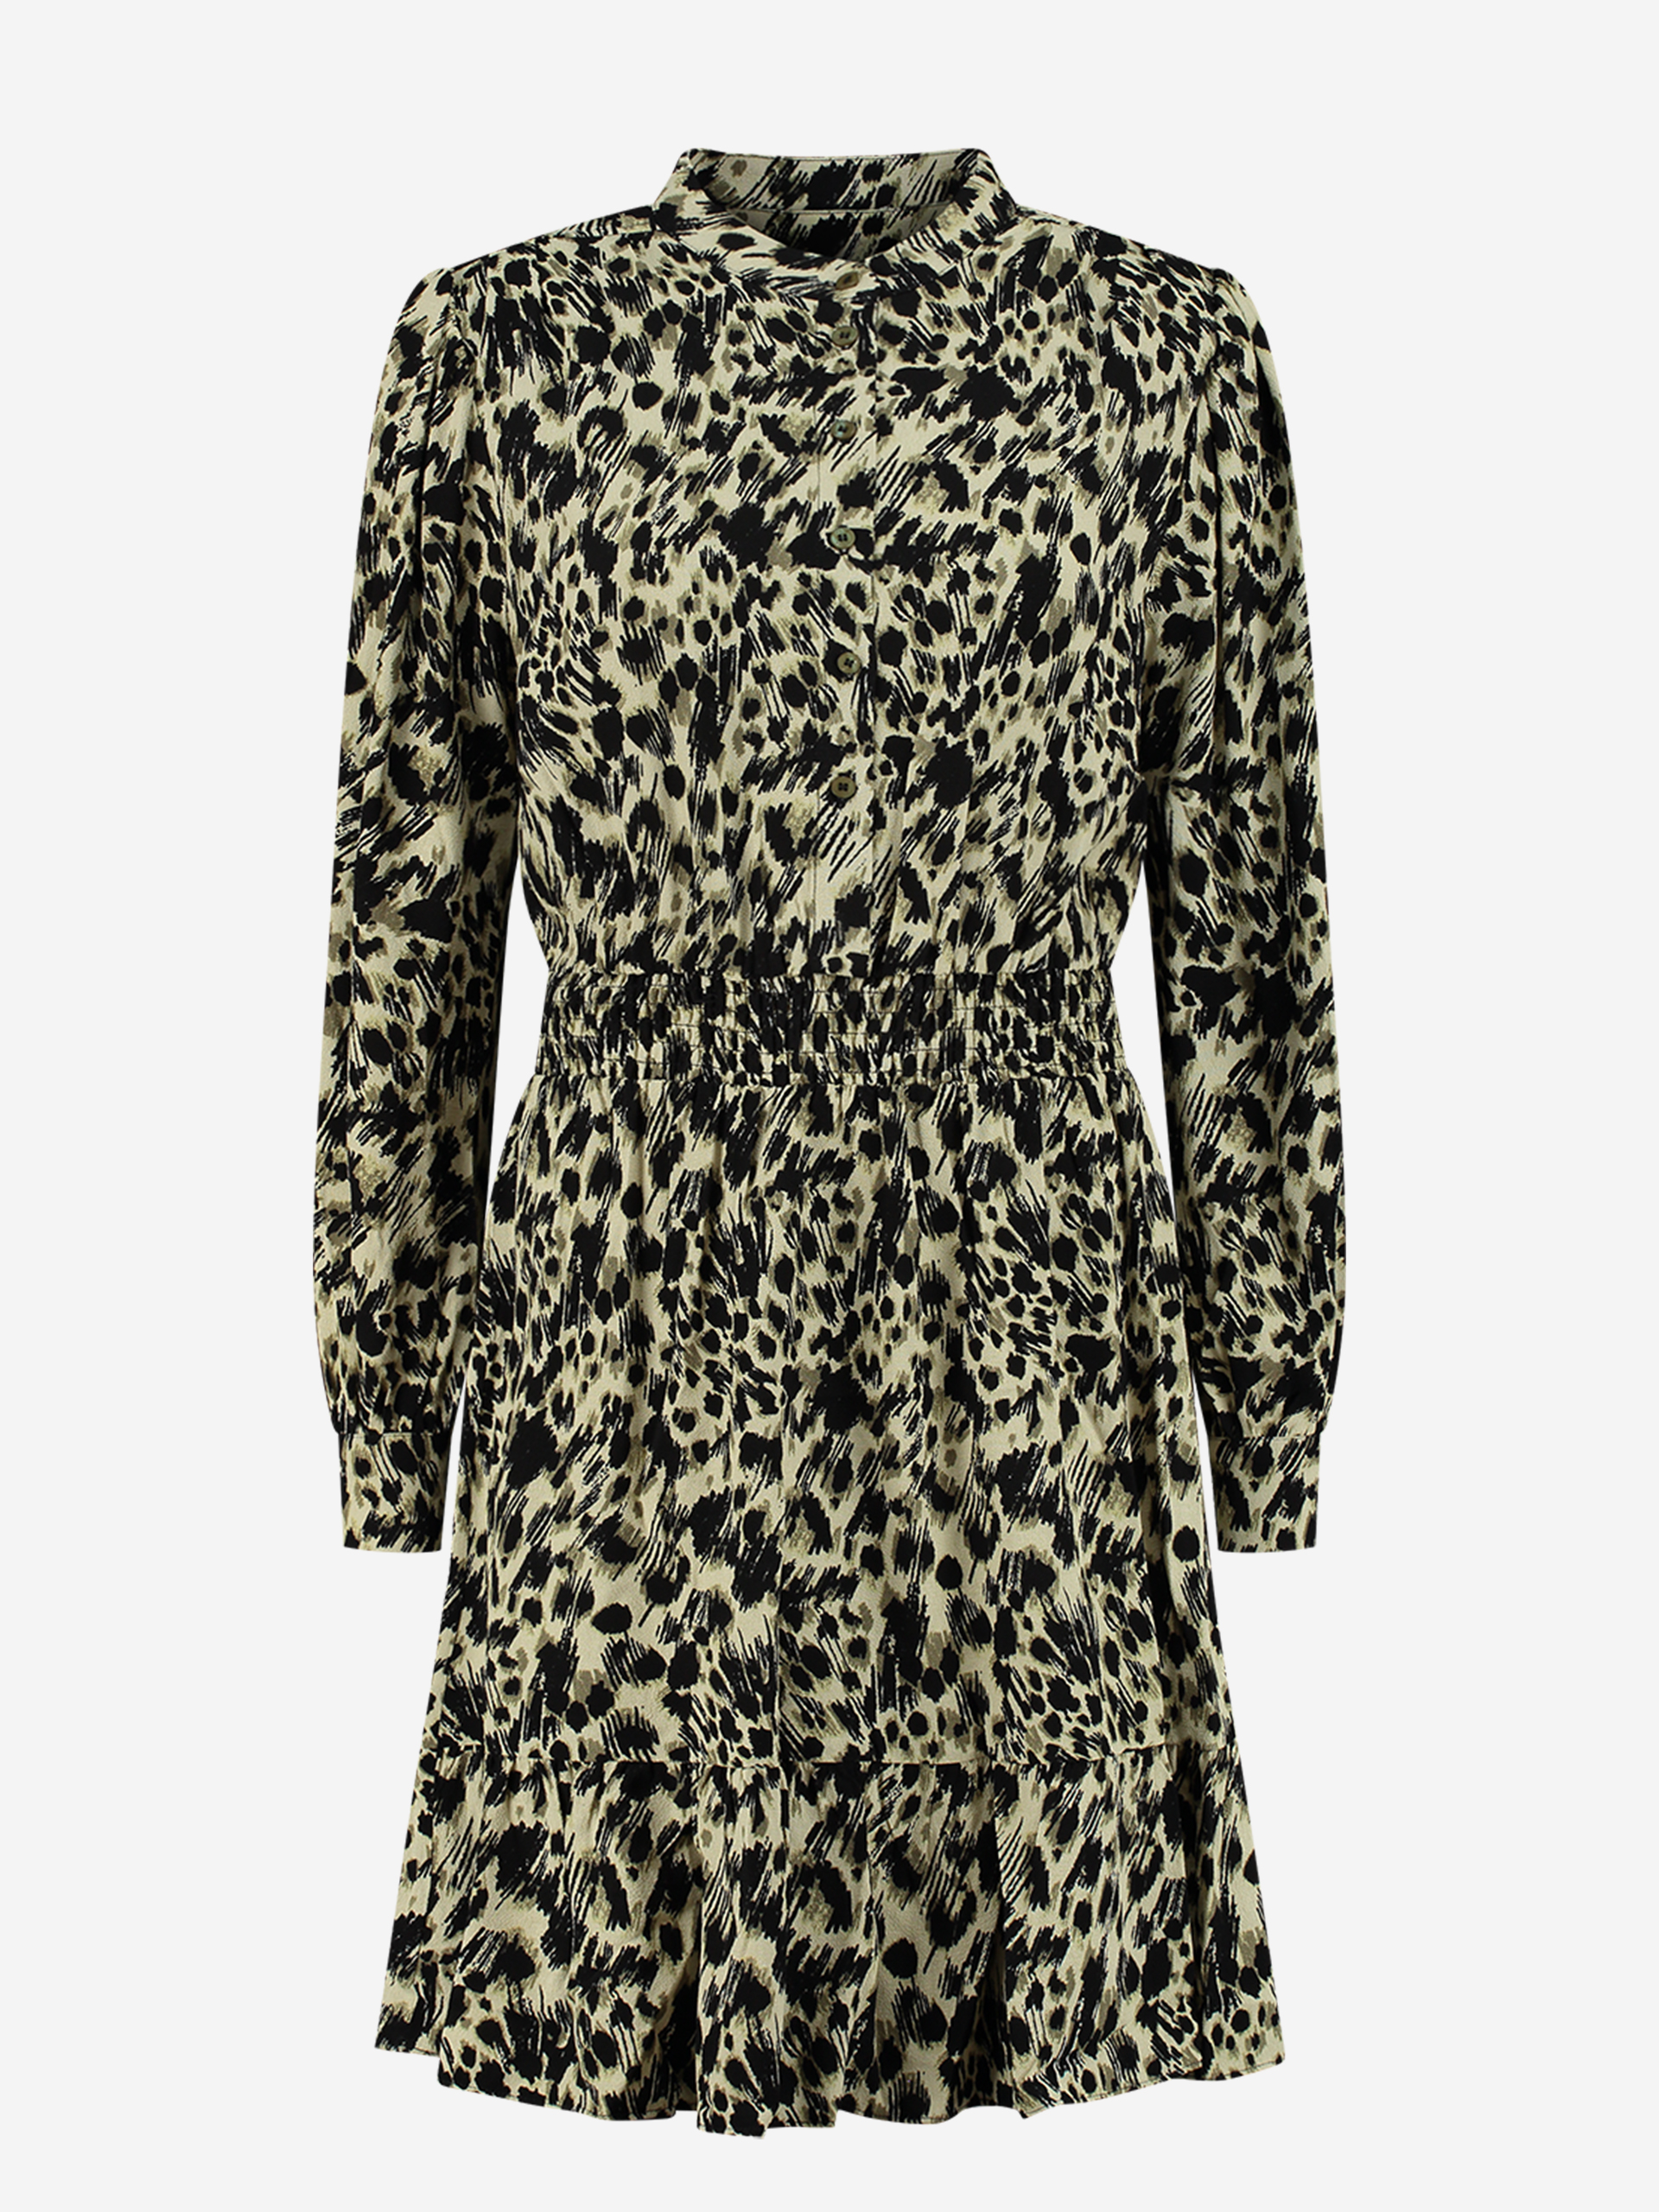 Leopard Dress with smock 